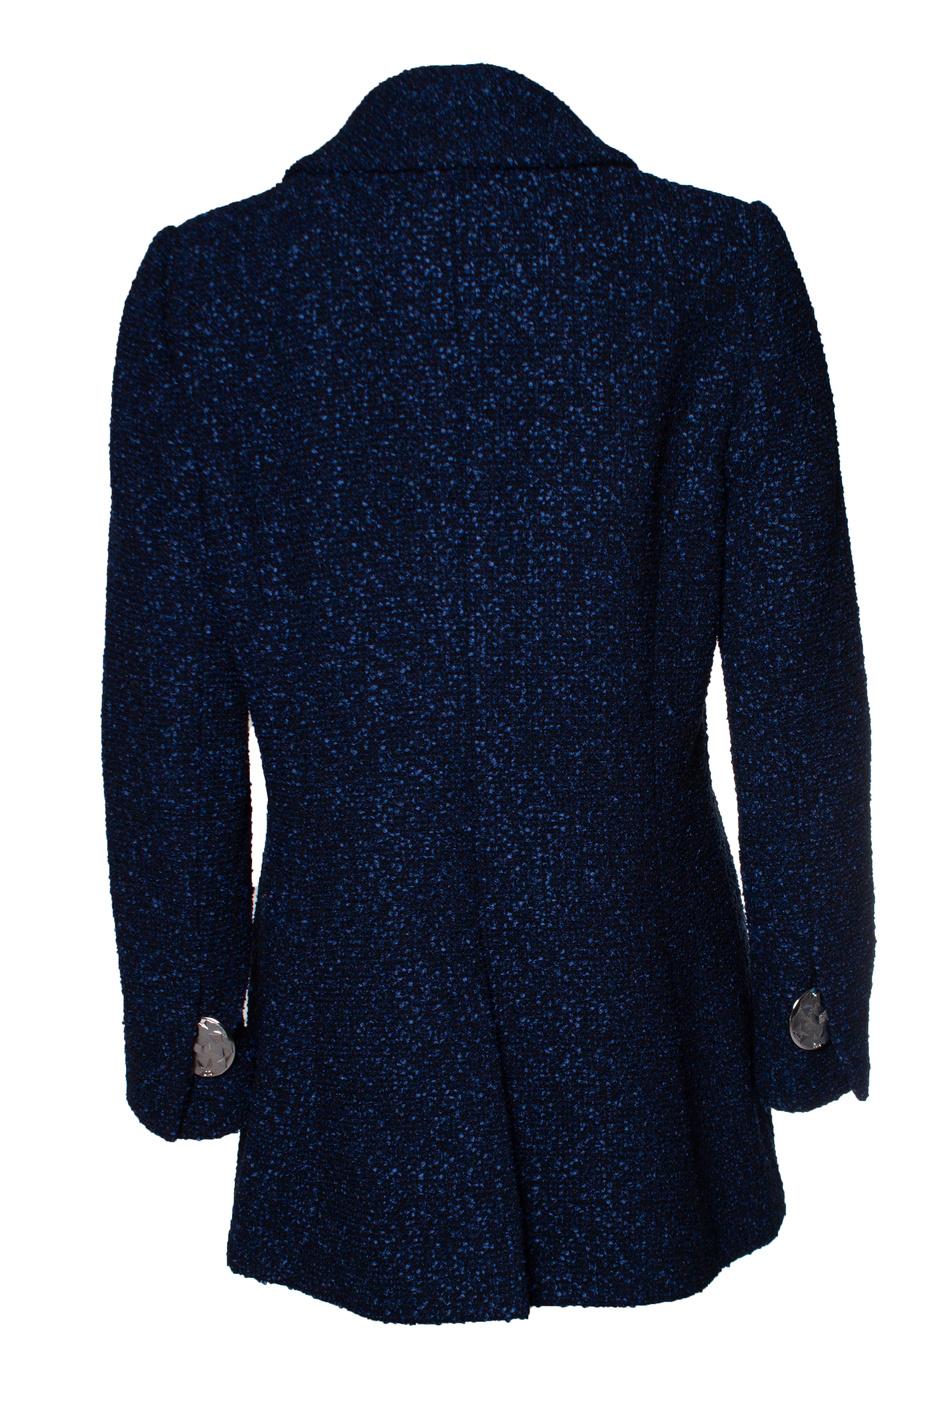 Chanel, Navy blue and black tweet jacket In Excellent Condition For Sale In AMSTERDAM, NL